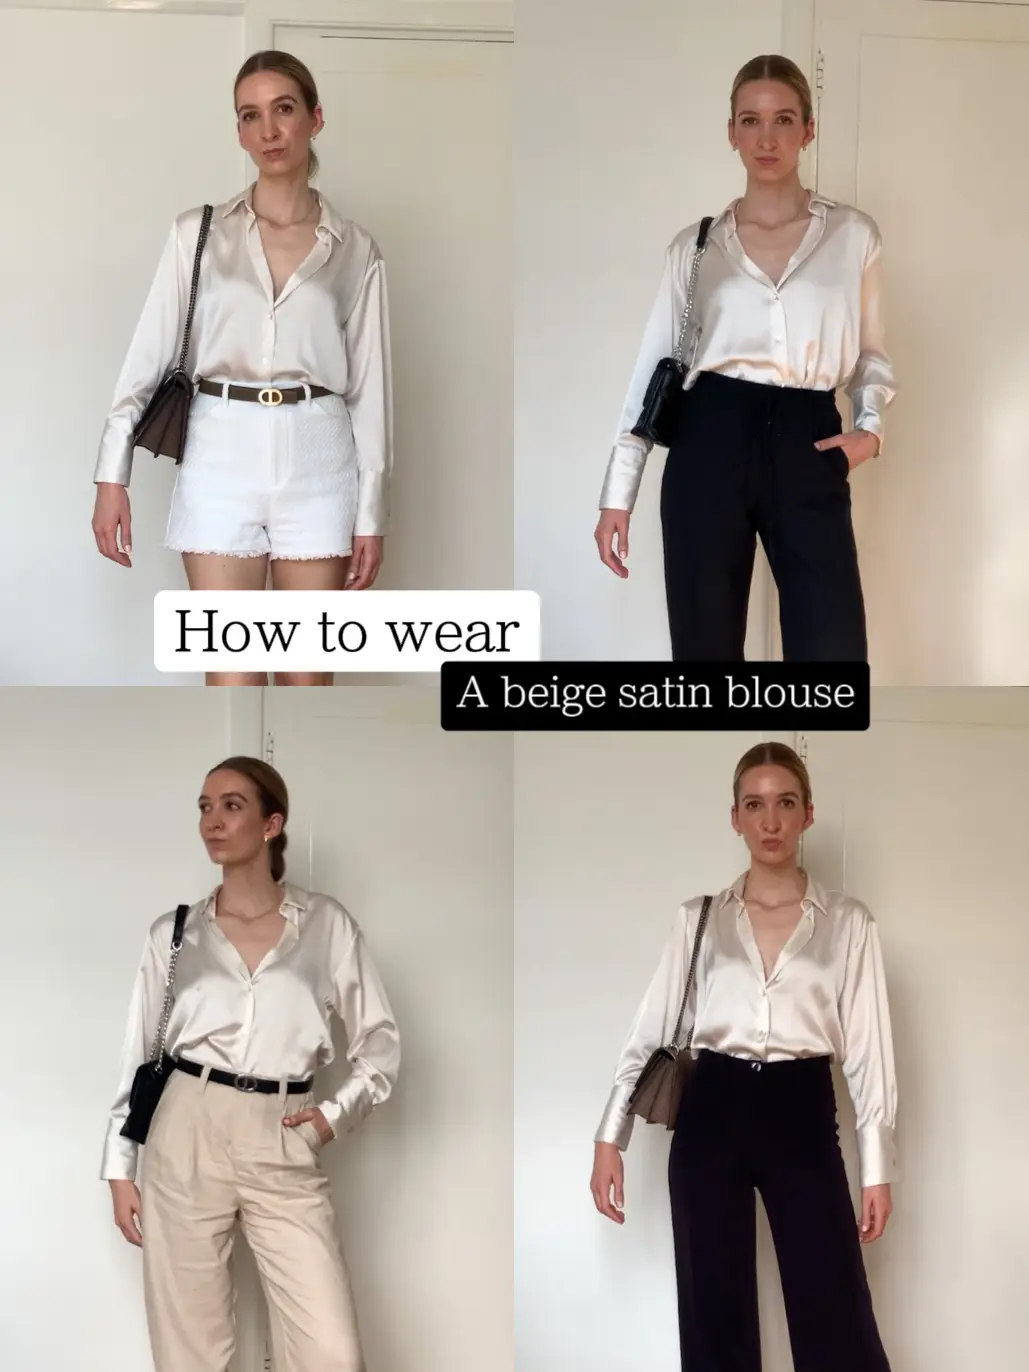 Beige satin blouse outfits, Gallery posted by Pauline Matter